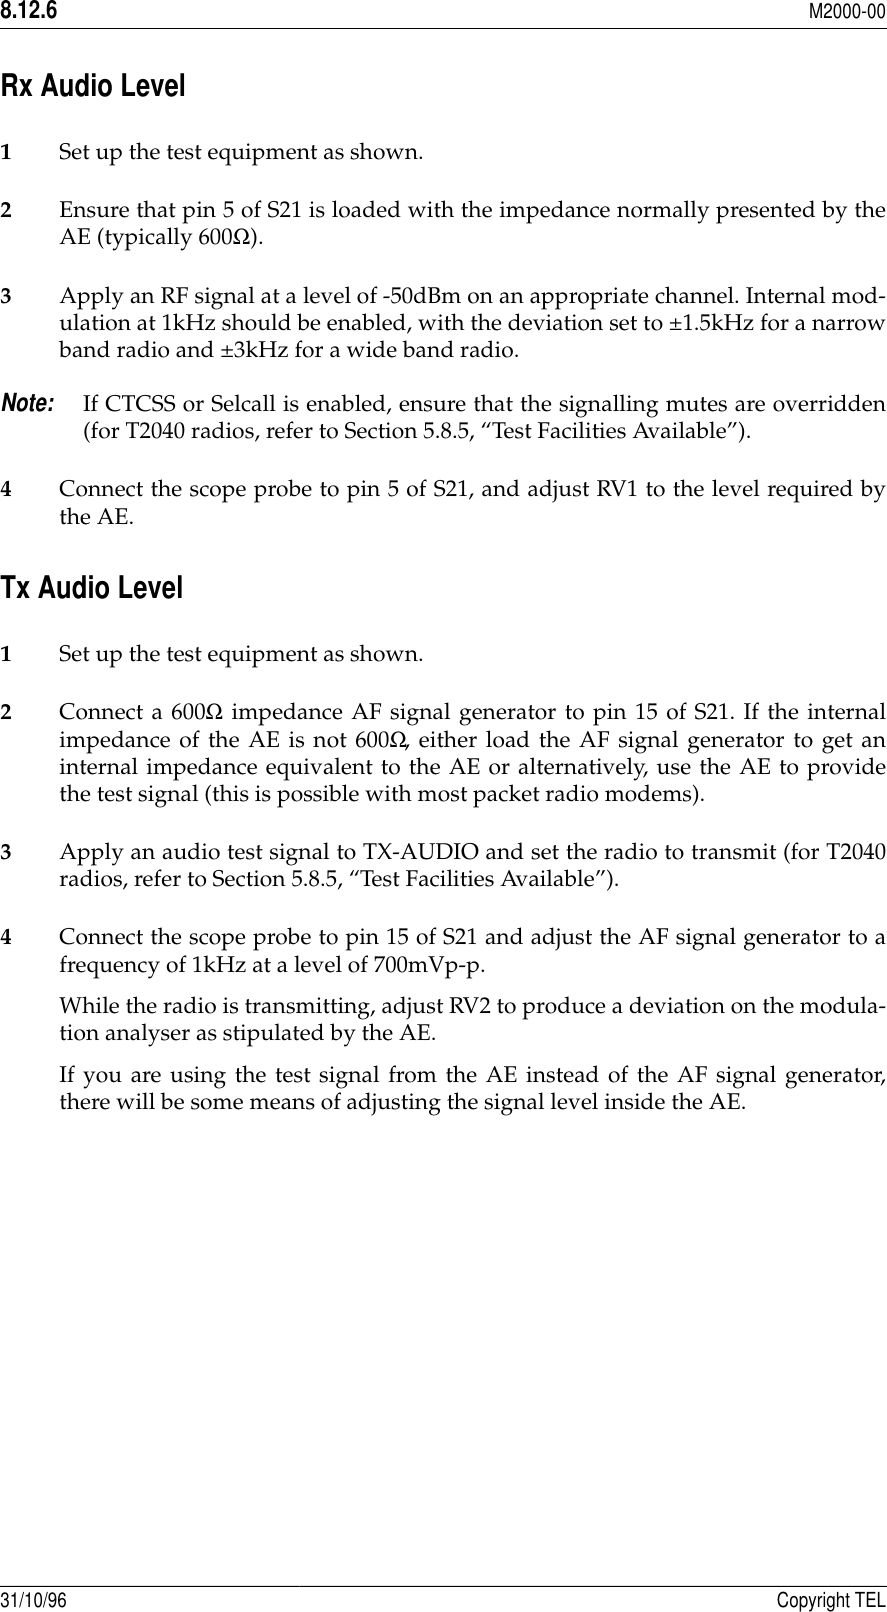 8.12.6M2000-0031/10/96 Copyright TELRx Audio Level 1Set up the test equipment as shown.2Ensure that pin 5 of S21 is loaded with the impedance normally presented by theAE (typically 600Ω).3Apply an RF signal at a level of -50dBm on an appropriate channel. Internal mod-ulation at 1kHz should be enabled, with the deviation set to ±1.5kHz for a narrowband radio and ±3kHz for a wide band radio. Note:If CTCSS or Selcall is enabled, ensure that the signalling mutes are overridden(for T2040 radios, refer to Section 5.8.5, “Test Facilities Available”).4Connect the scope probe to pin 5 of S21, and adjust RV1 to the level required bythe AE.Tx Audio Level 1Set up the test equipment as shown.2Connect a 600Ω impedance AF signal generator to pin 15 of S21. If the internalimpedance of the AE is not 600Ω, either load the AF signal generator to get aninternal impedance equivalent to the AE or alternatively, use the AE to providethe test signal (this is possible with most packet radio modems).3Apply an audio test signal to TX-AUDIO and set the radio to transmit (for T2040radios, refer to Section 5.8.5, “Test Facilities Available”).4Connect the scope probe to pin 15 of S21 and adjust the AF signal generator to afrequency of 1kHz at a level of 700mVp-p.While the radio is transmitting, adjust RV2 to produce a deviation on the modula-tion analyser as stipulated by the AE.If you are using the test signal from the AE instead of the AF signal generator,there will be some means of adjusting the signal level inside the AE.